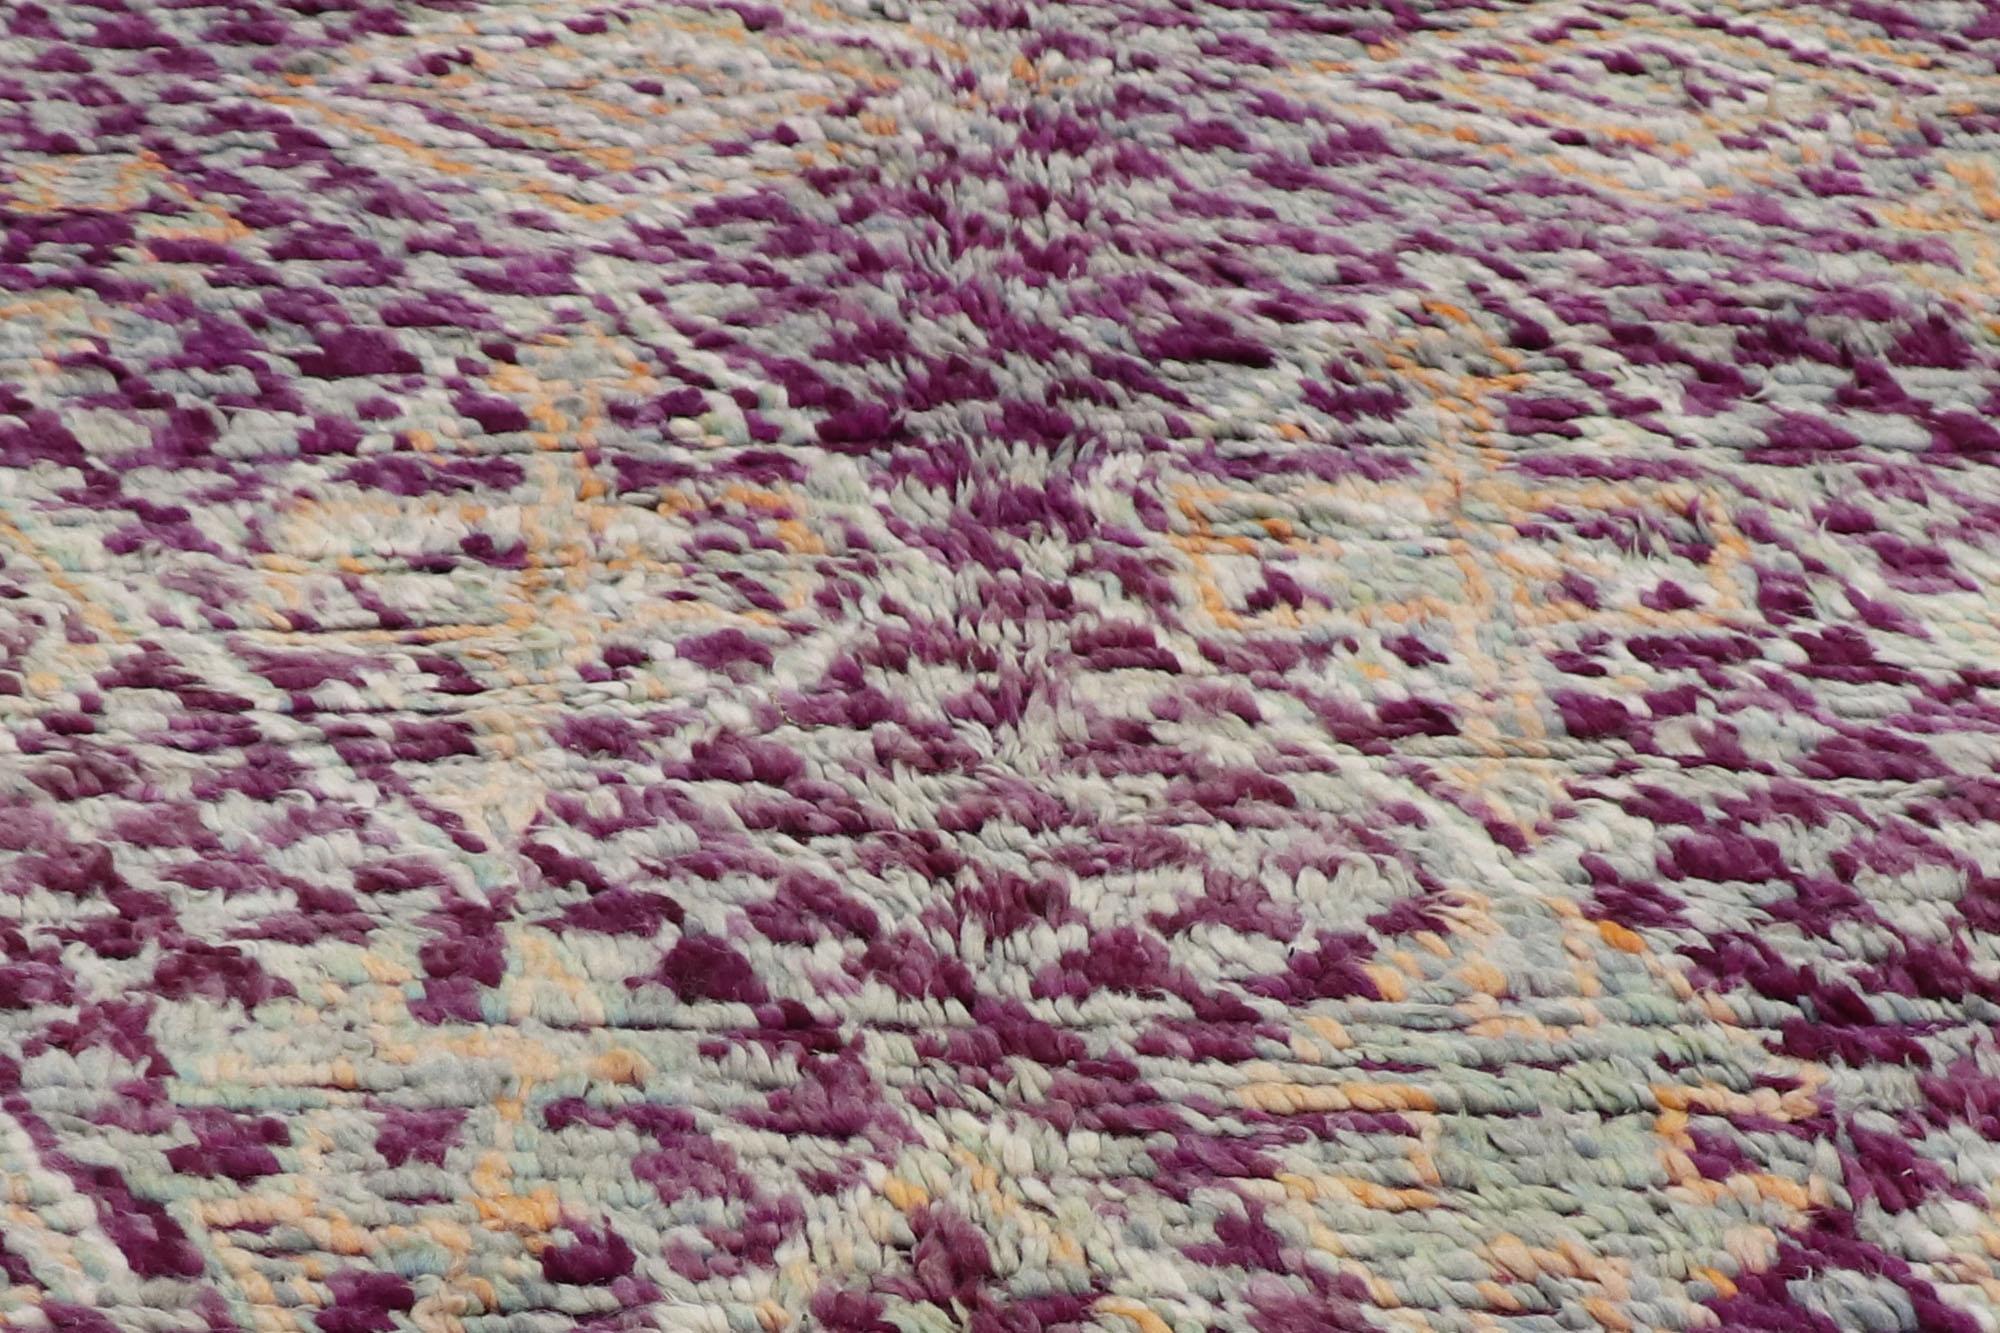 Vintage Purple Moroccan Rug, Boho Tribal Chic Meets Global Midcentury In Good Condition For Sale In Dallas, TX